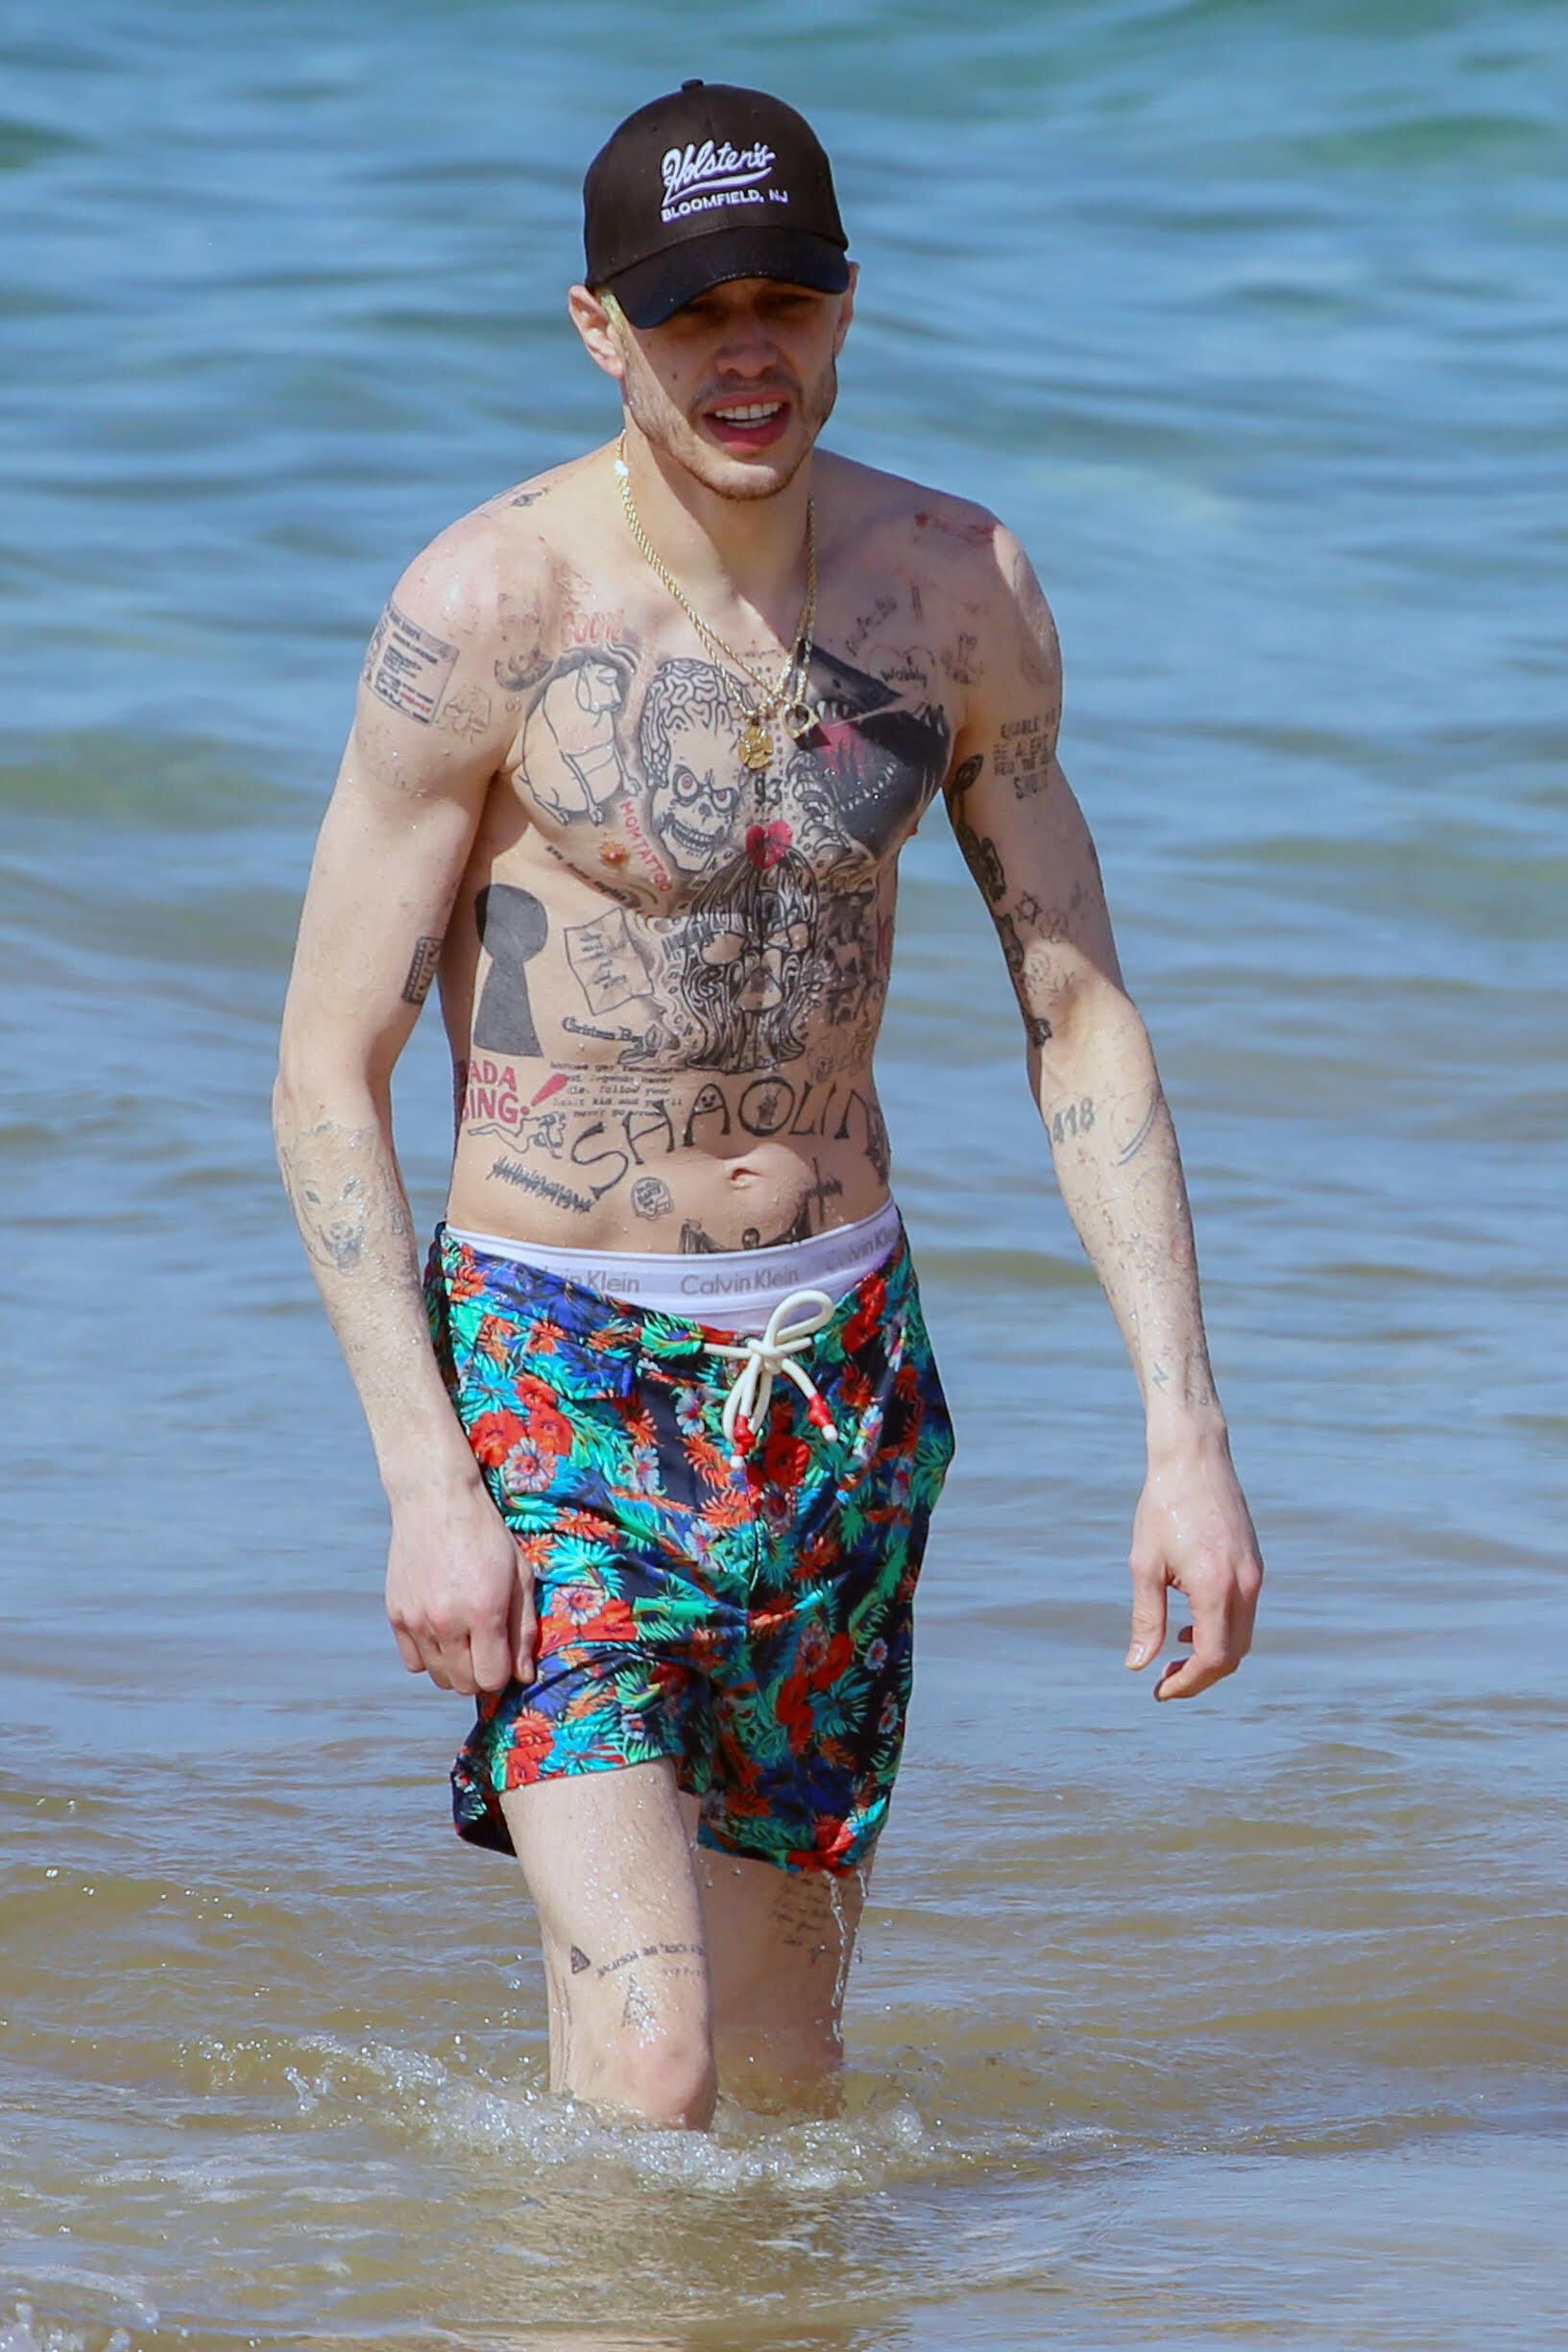 Does Pete Davidson have a Kim Kardashian tattoo Fans spot KIM inked on  his chest in shirtless photo  silivecom